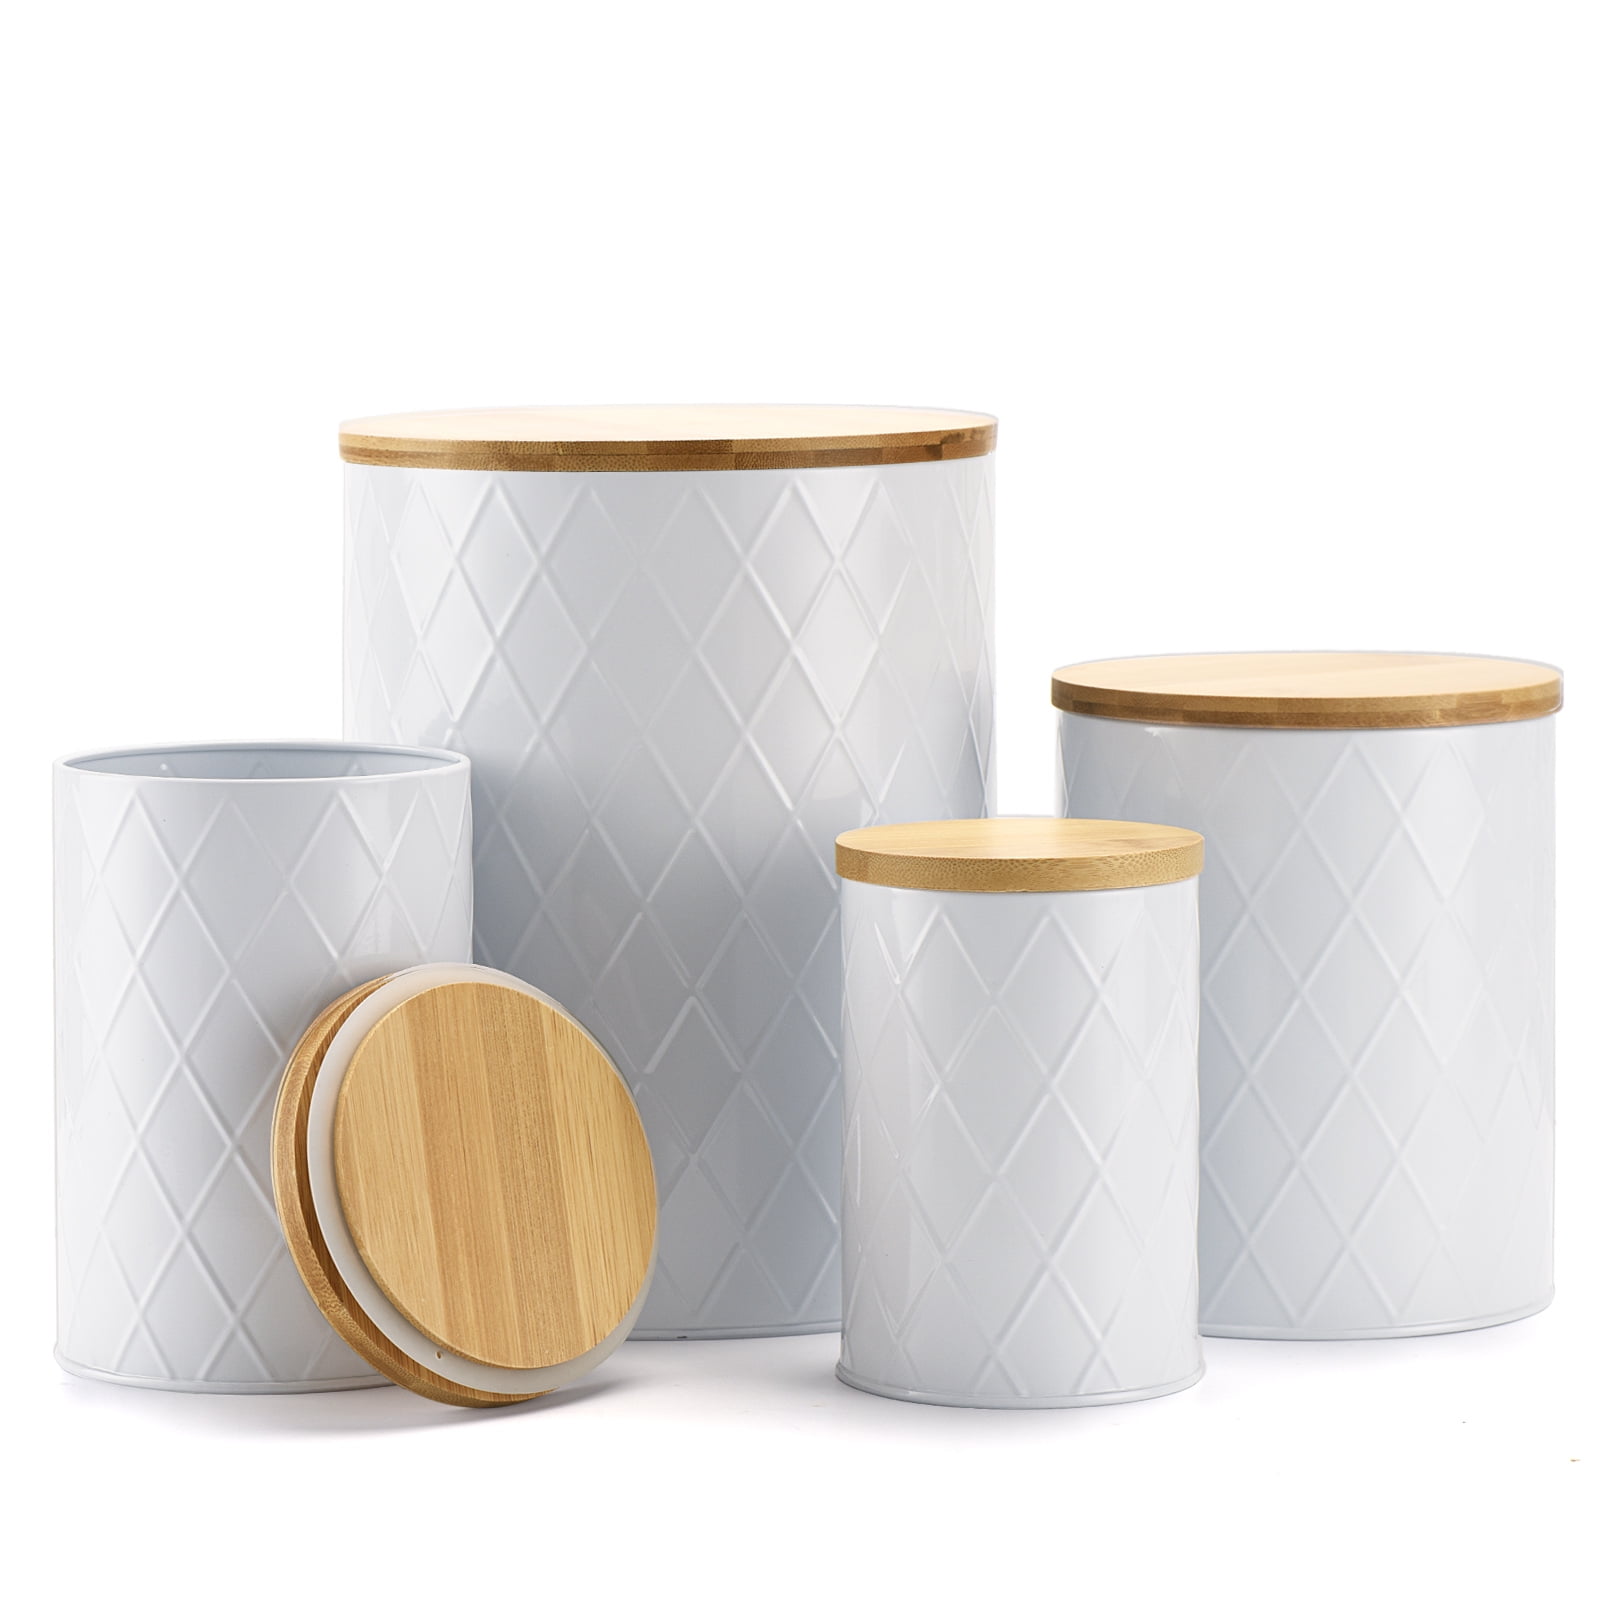 DAYYET Canisters Sets for the Kitchen, Airtight Kitchen Canisters for  Countertop, White Flour and Sugar Containers, Tea Coffee Sugar Canister  Set